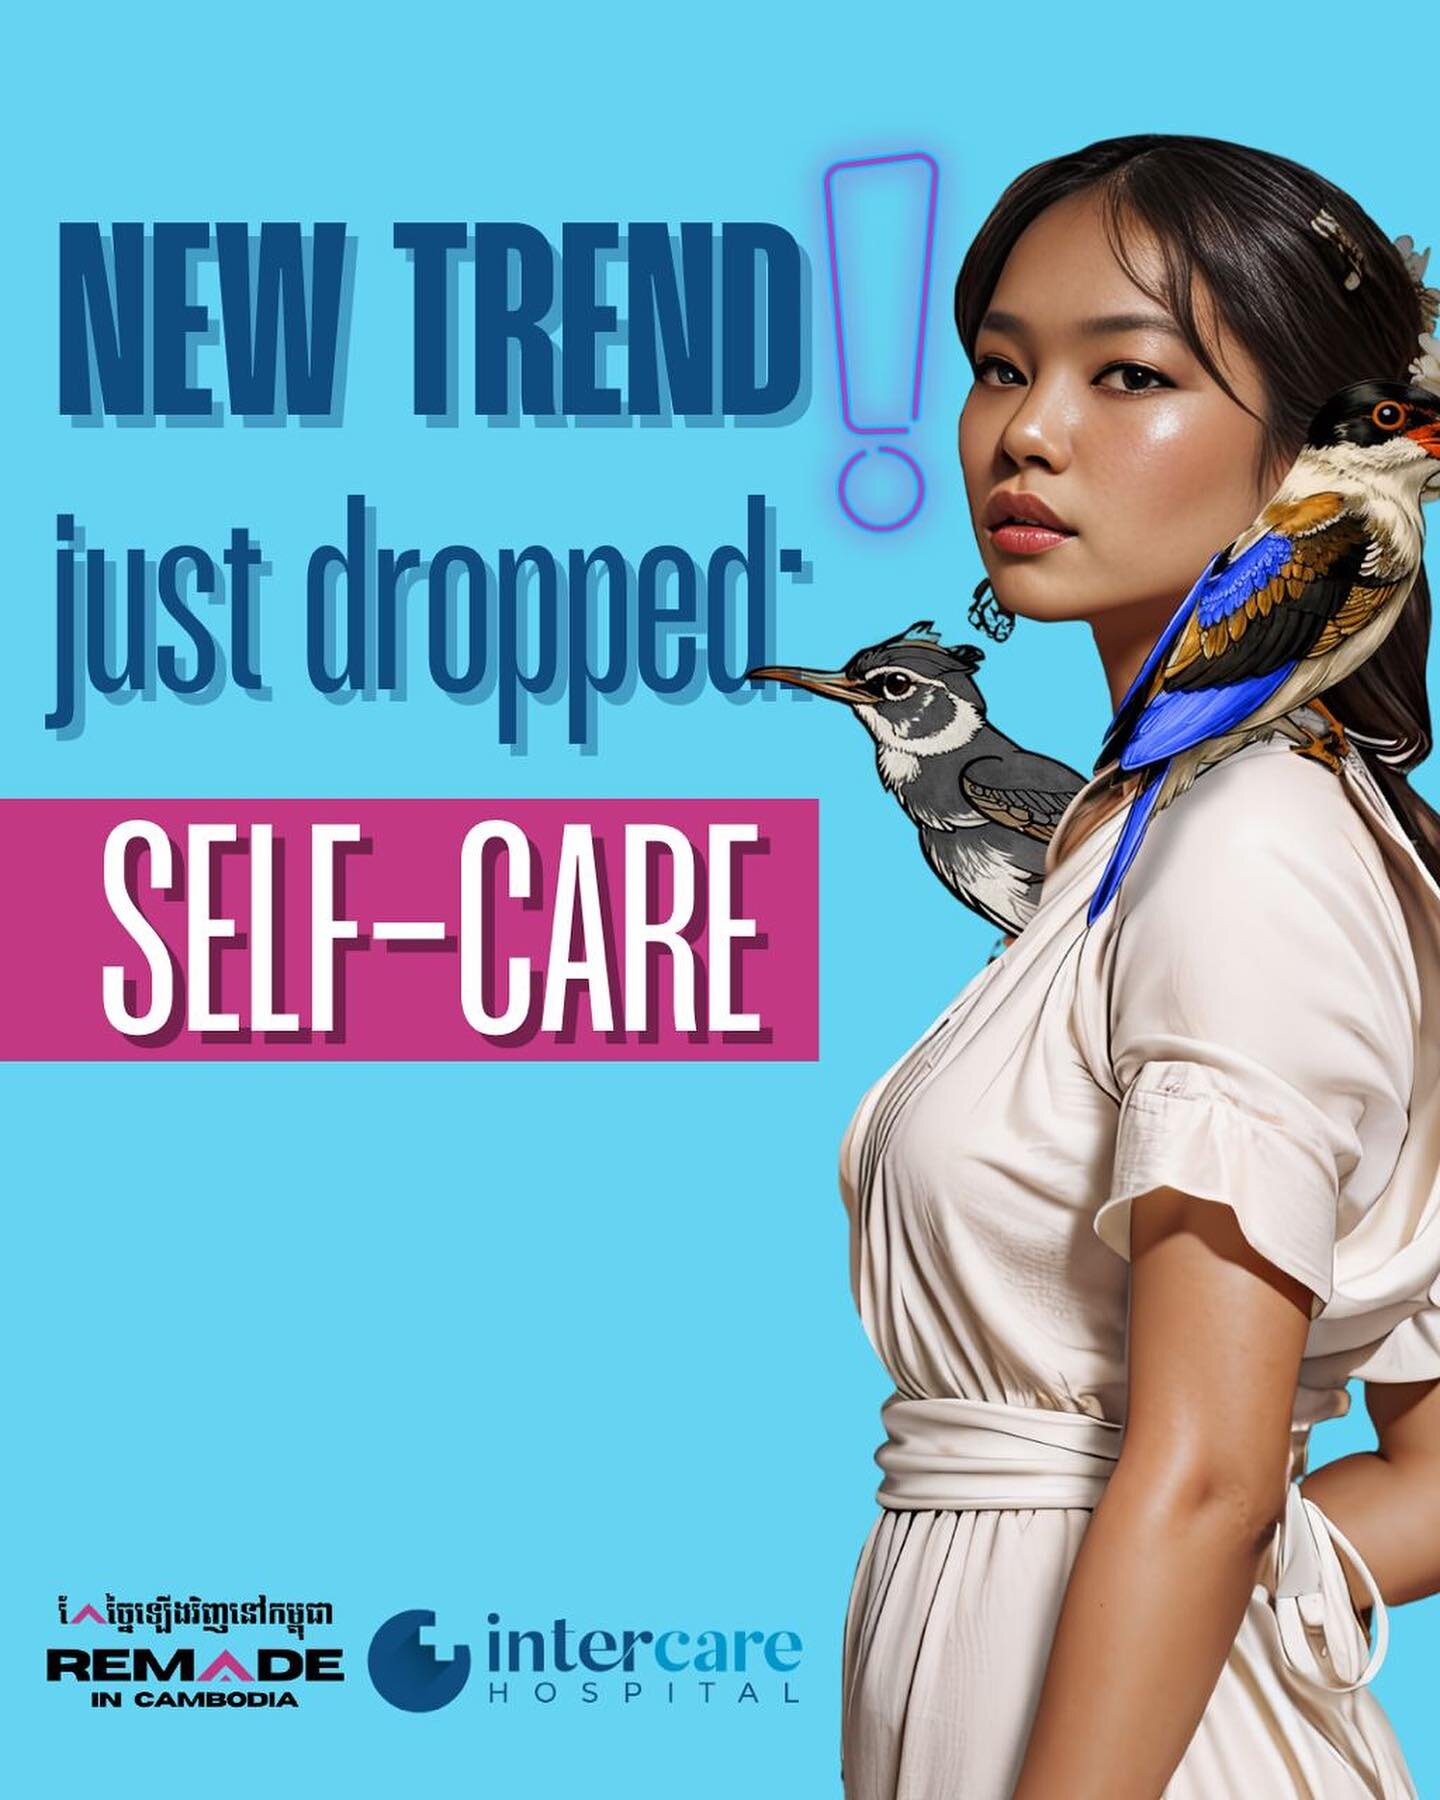 Self care is the new pink 💅🏼

@intercarehospital and ReMade in Cambodia want you all to thrive at our show! So follow these tips for a fun and  safe event 🫶🏻